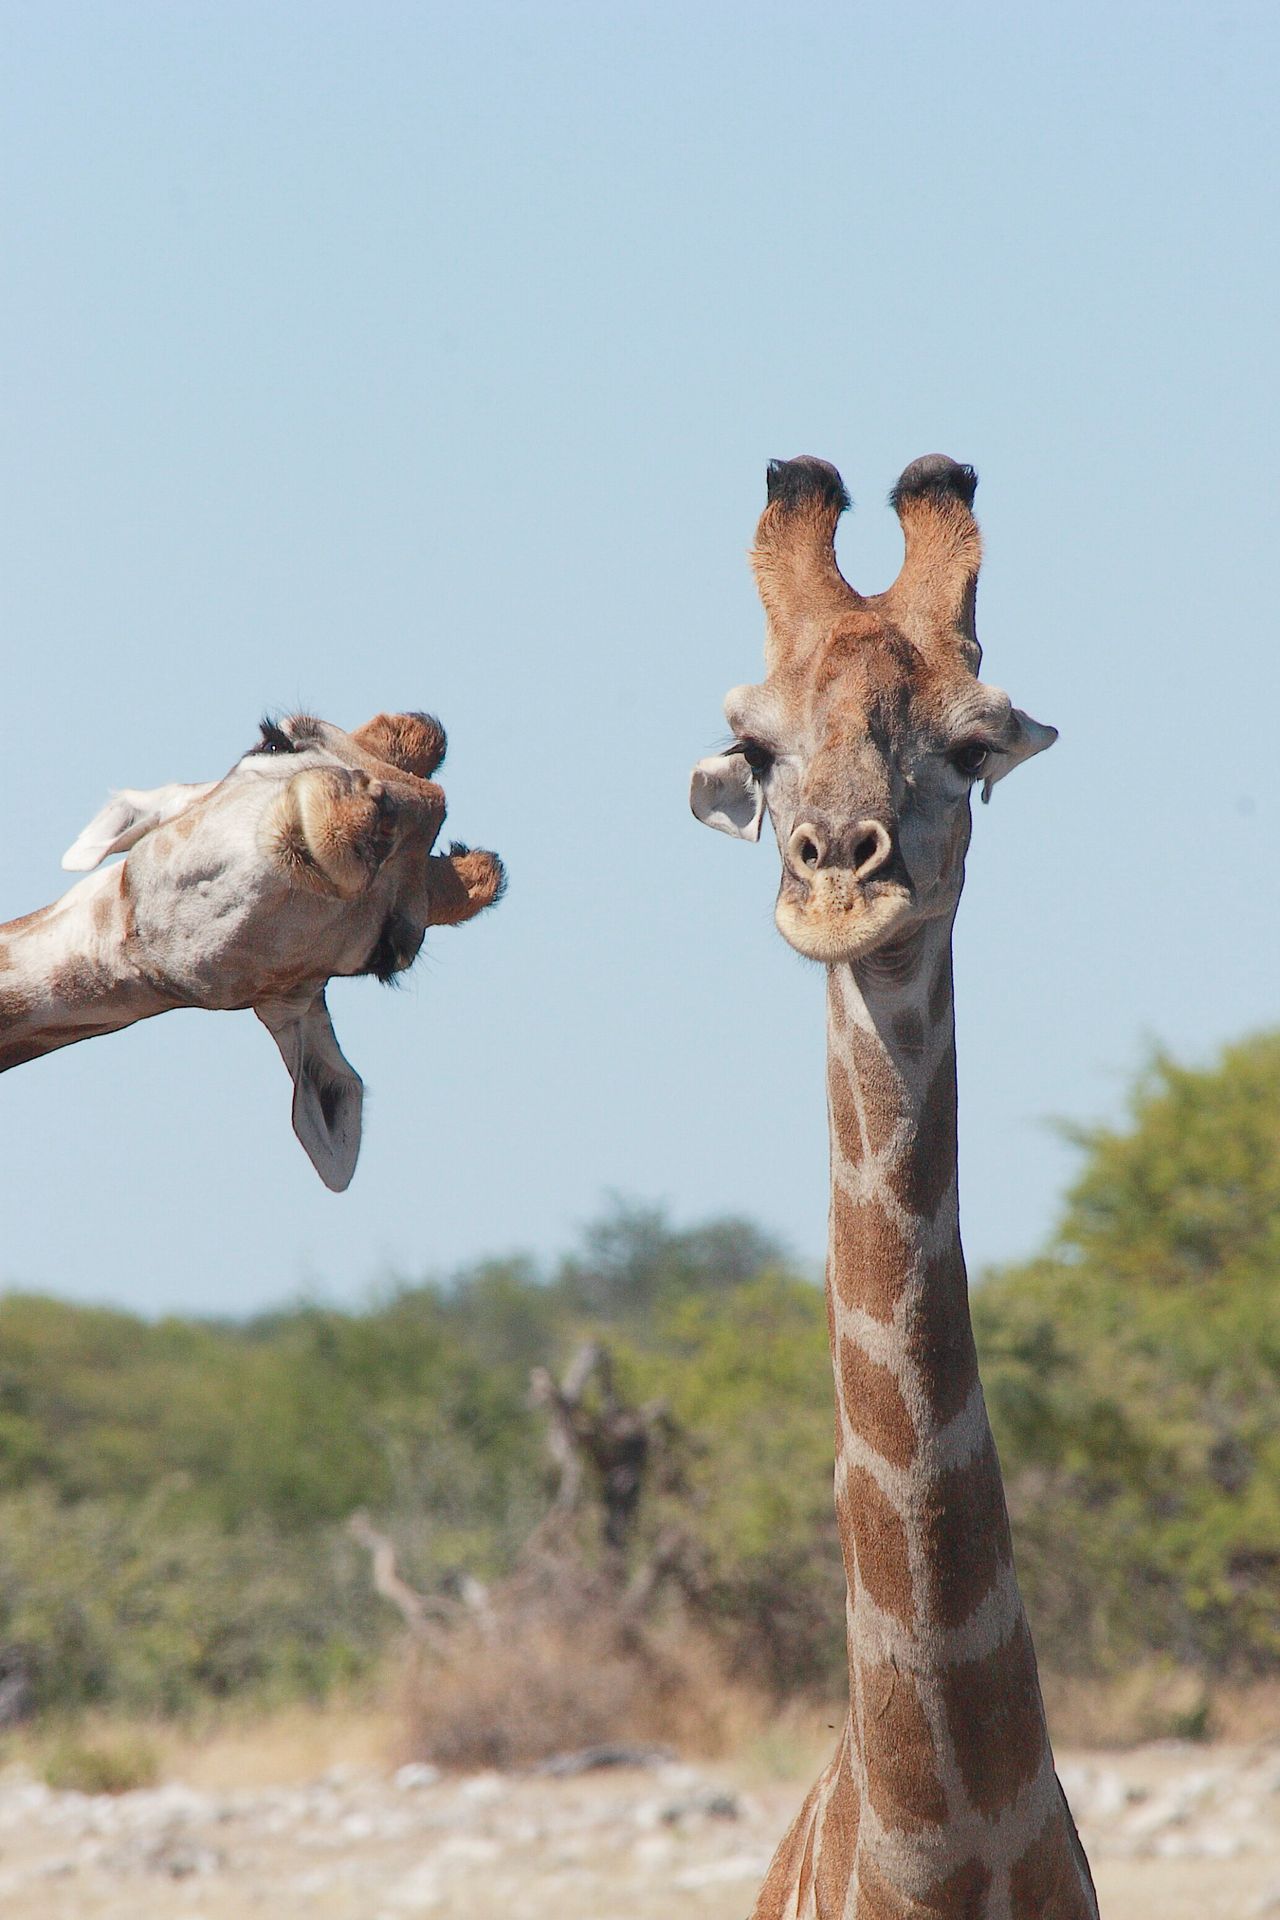 “Crashing into the Picture” shows a couple of giraffes in Etosha National Park, Namibia.